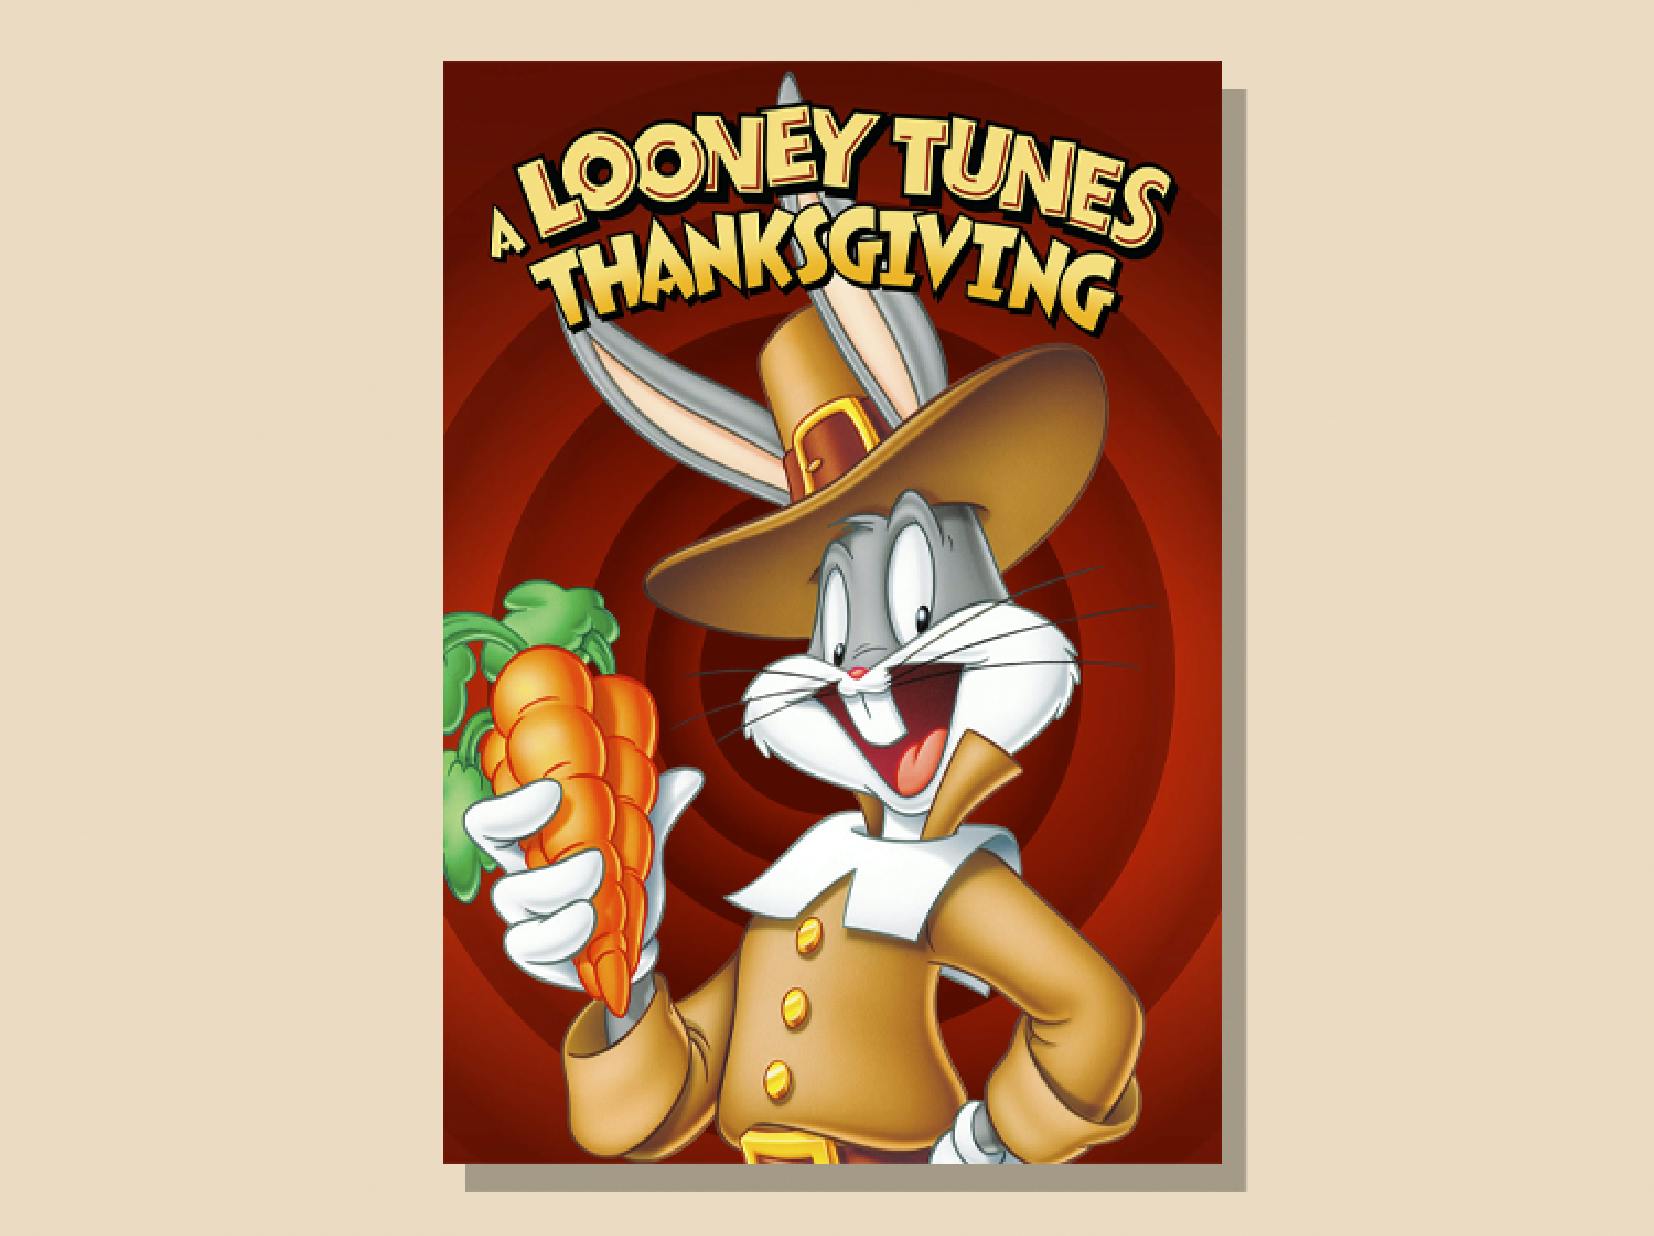 Looney Tunes Thanksgiving, one of the best kids thanksgiving movies